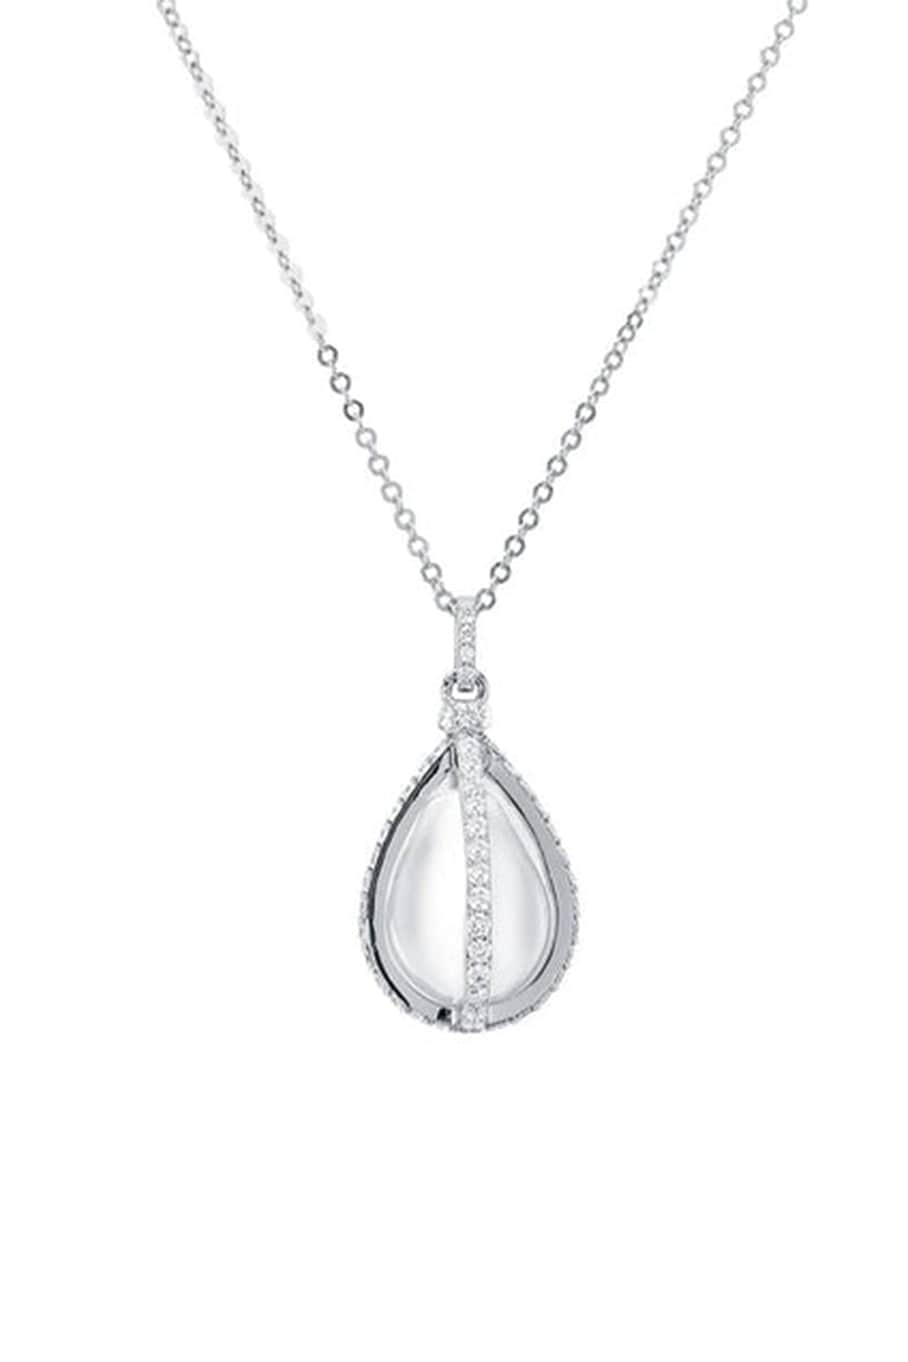 CARBON & HYDE-Pearl Cage Necklace - White Gold-WHITE GOLD